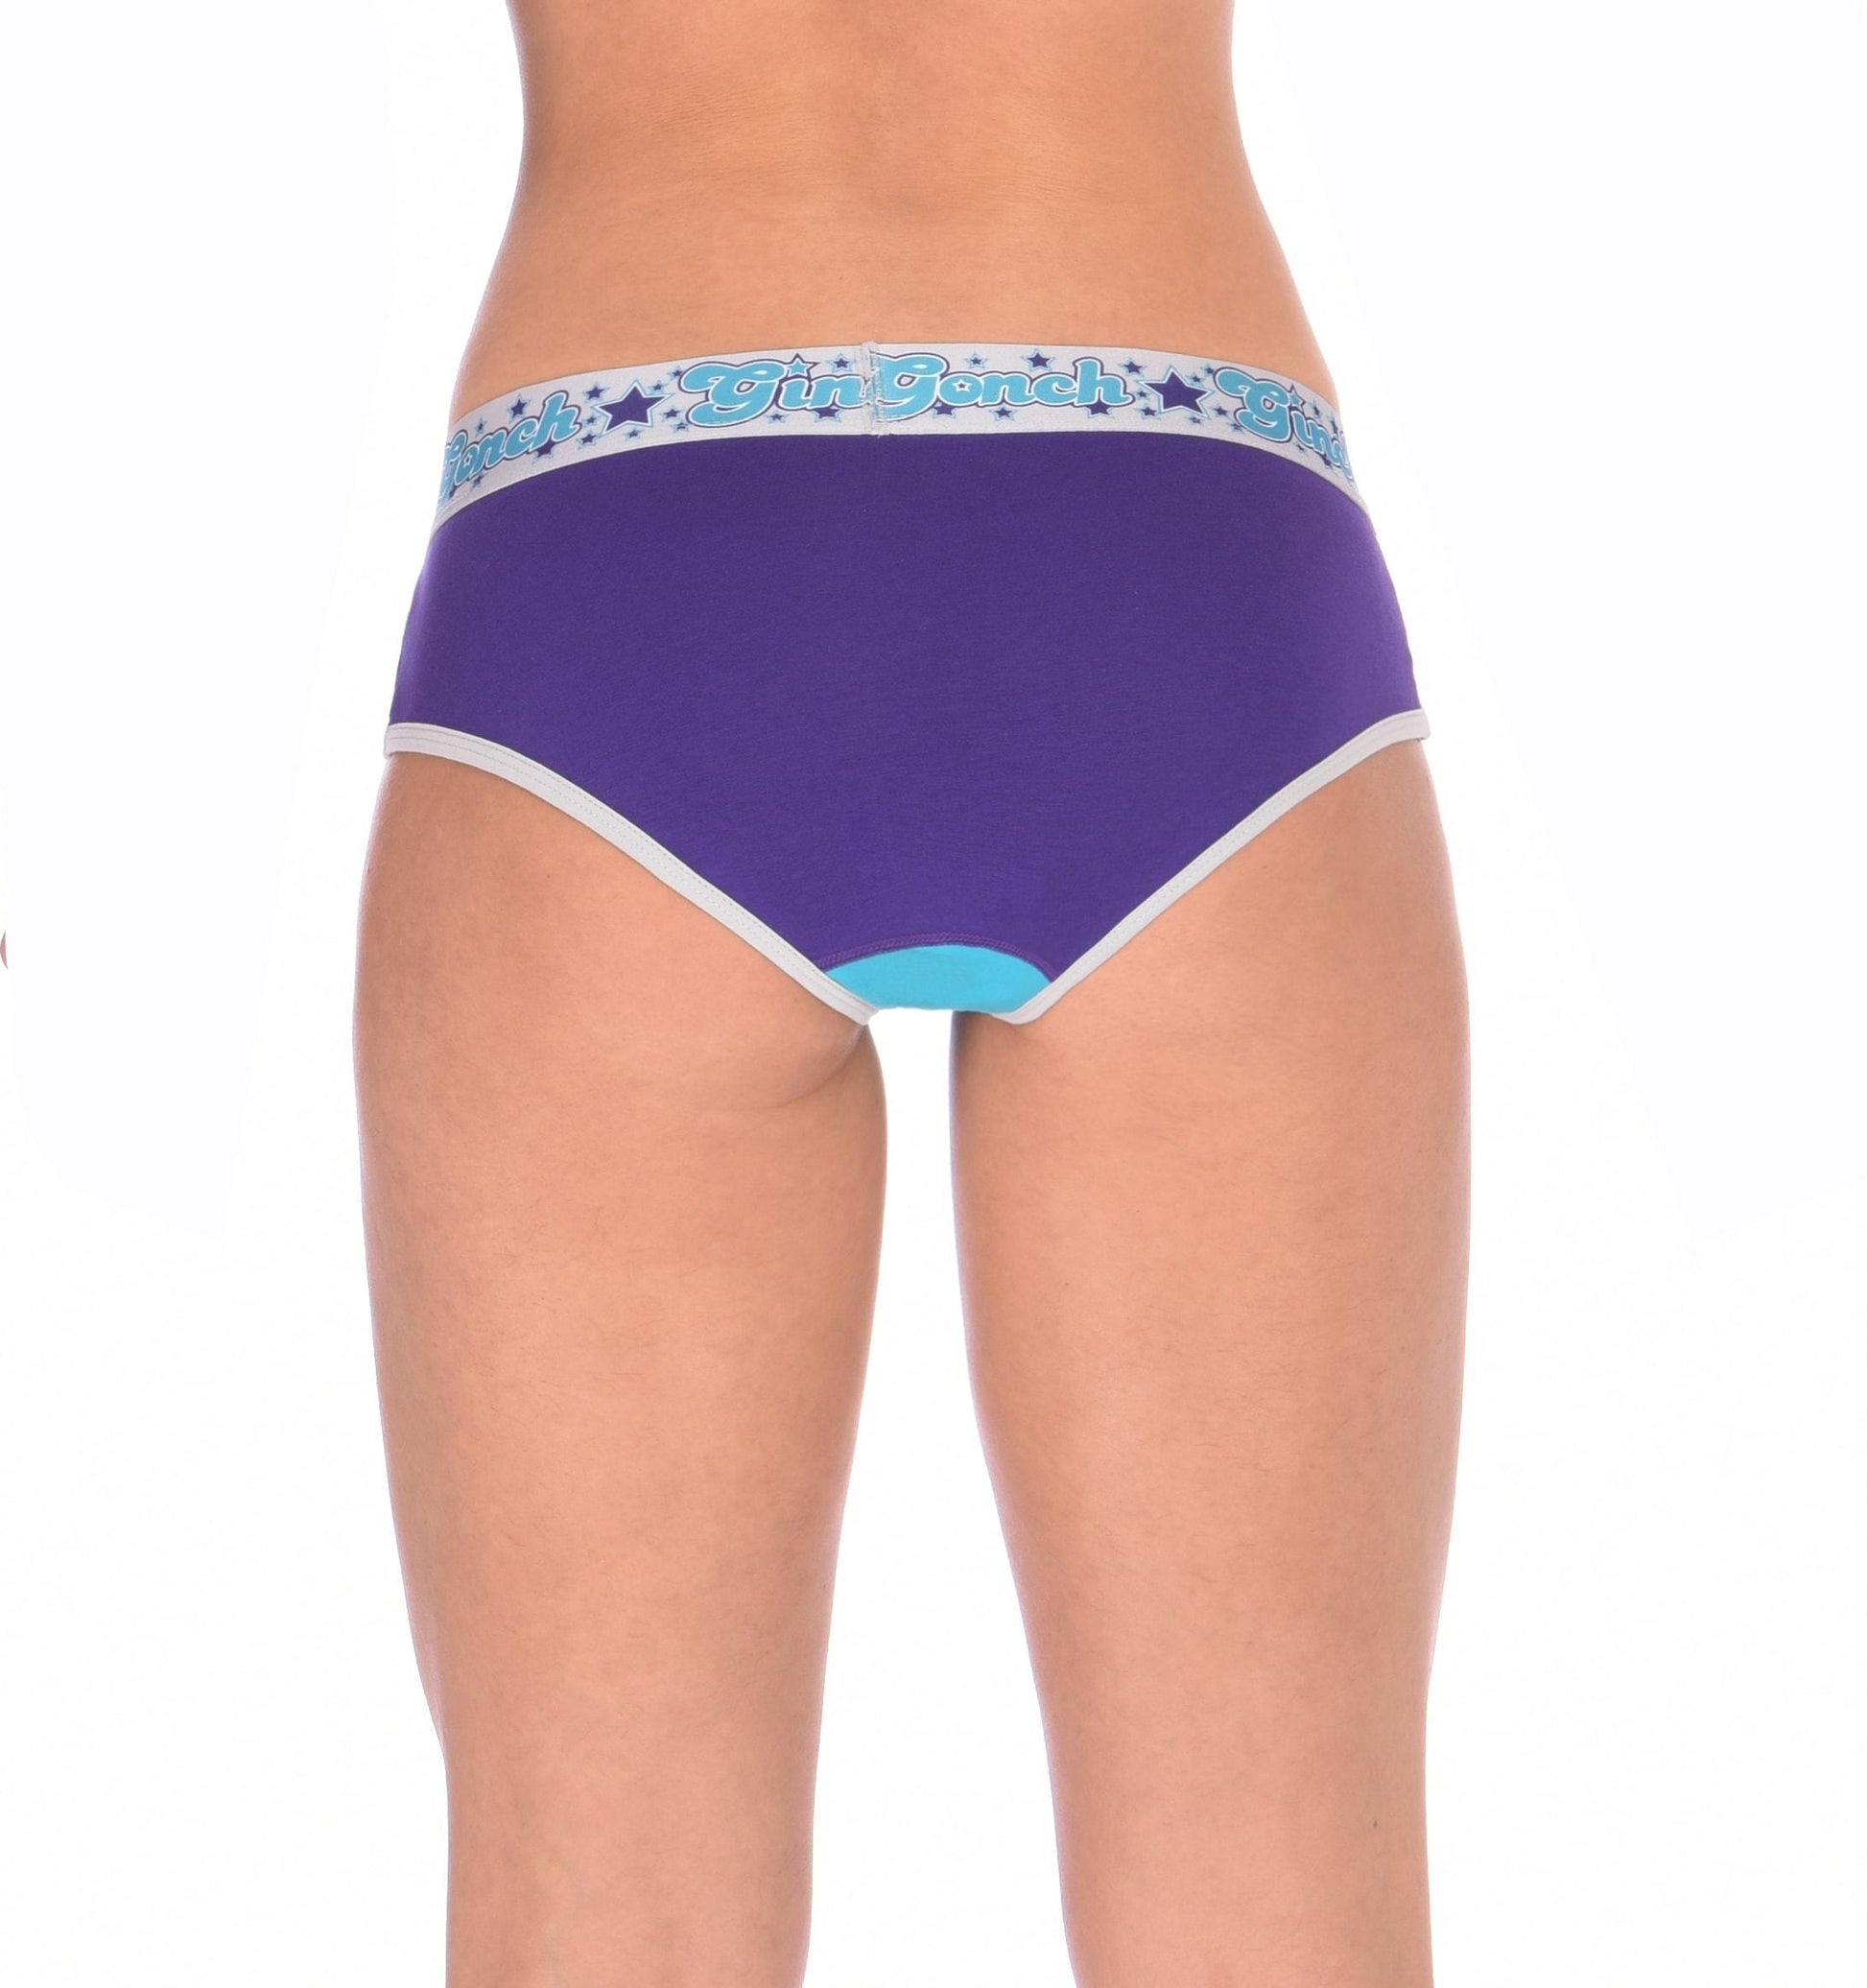 GG Ginch Gonch Purple Haze Low Rise boy cut Brief y front - Women's Underwear purple and aqua panels with grey trim and silver printed waistband back 